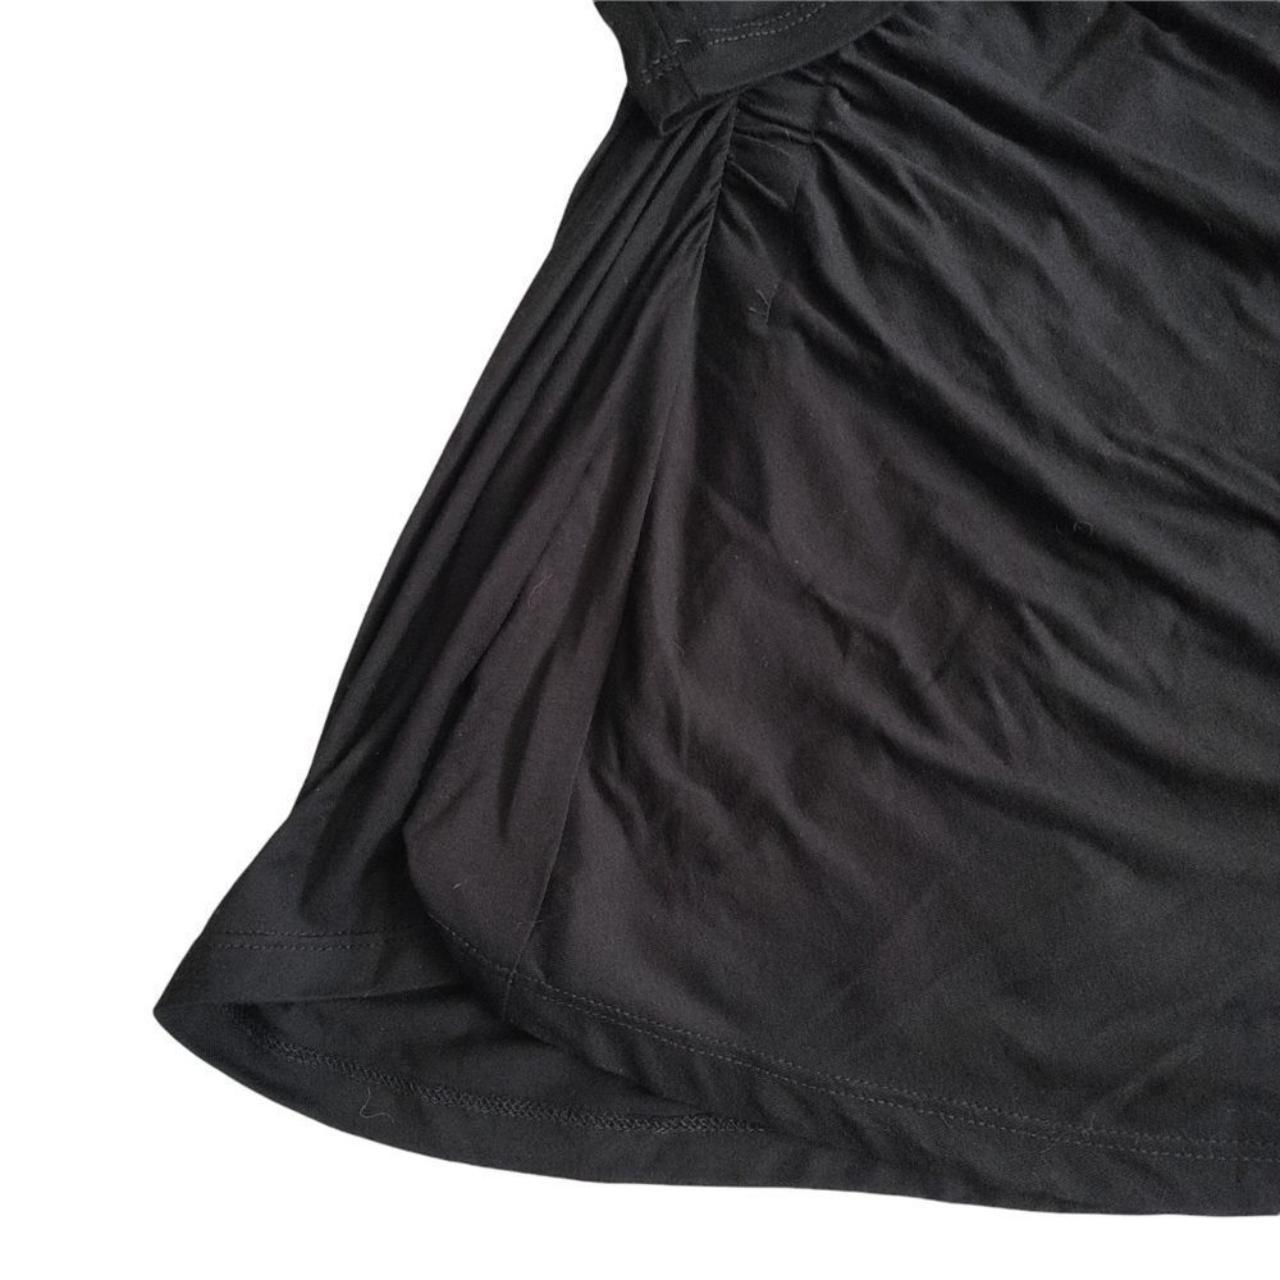 Product Image 2 - New A.L.C. Sammy Black Ruched